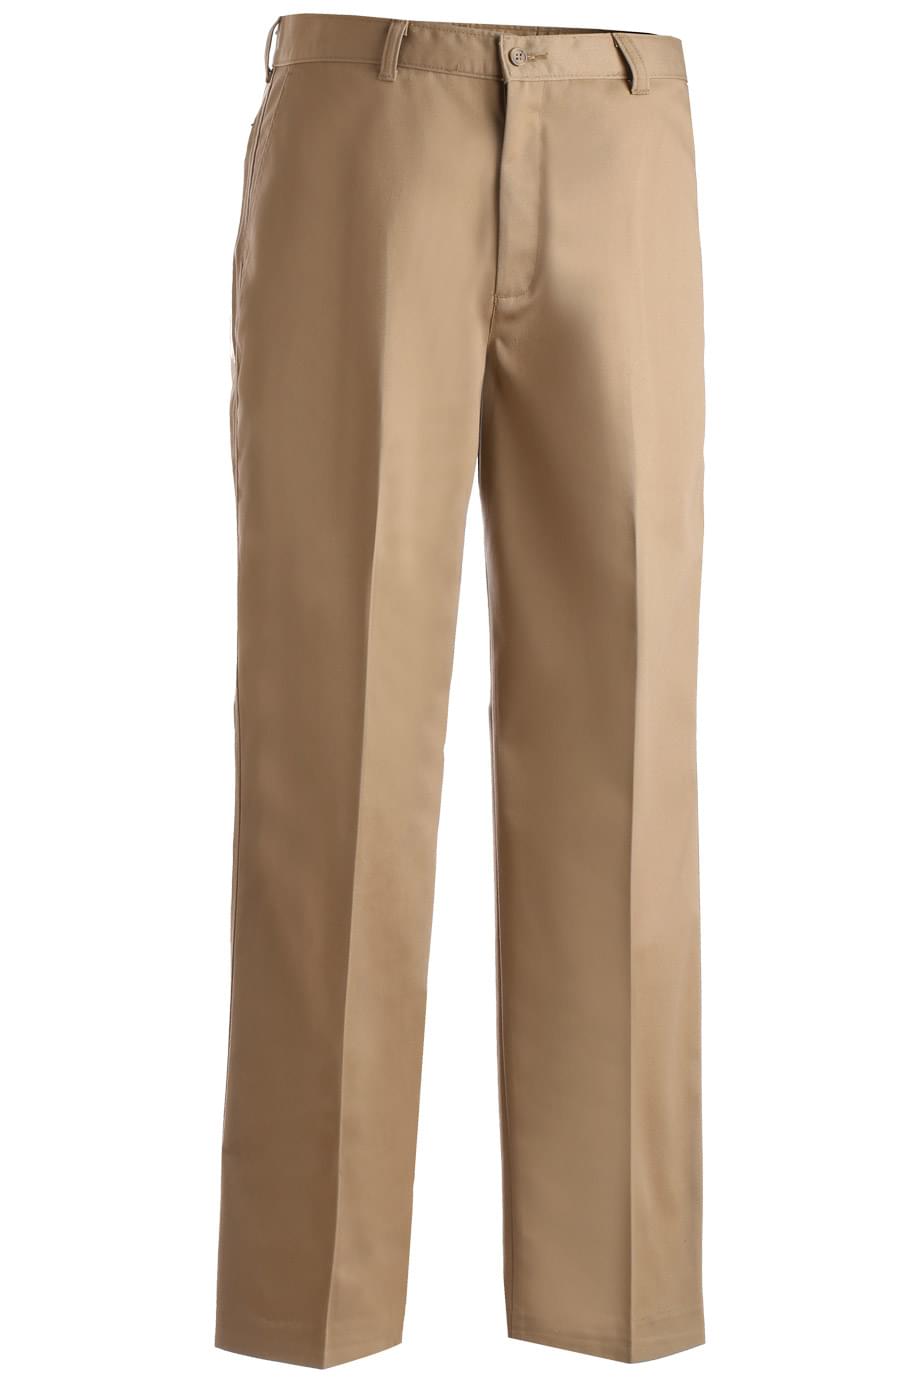 BUSINESS CHINO FLAT FRONT PANT